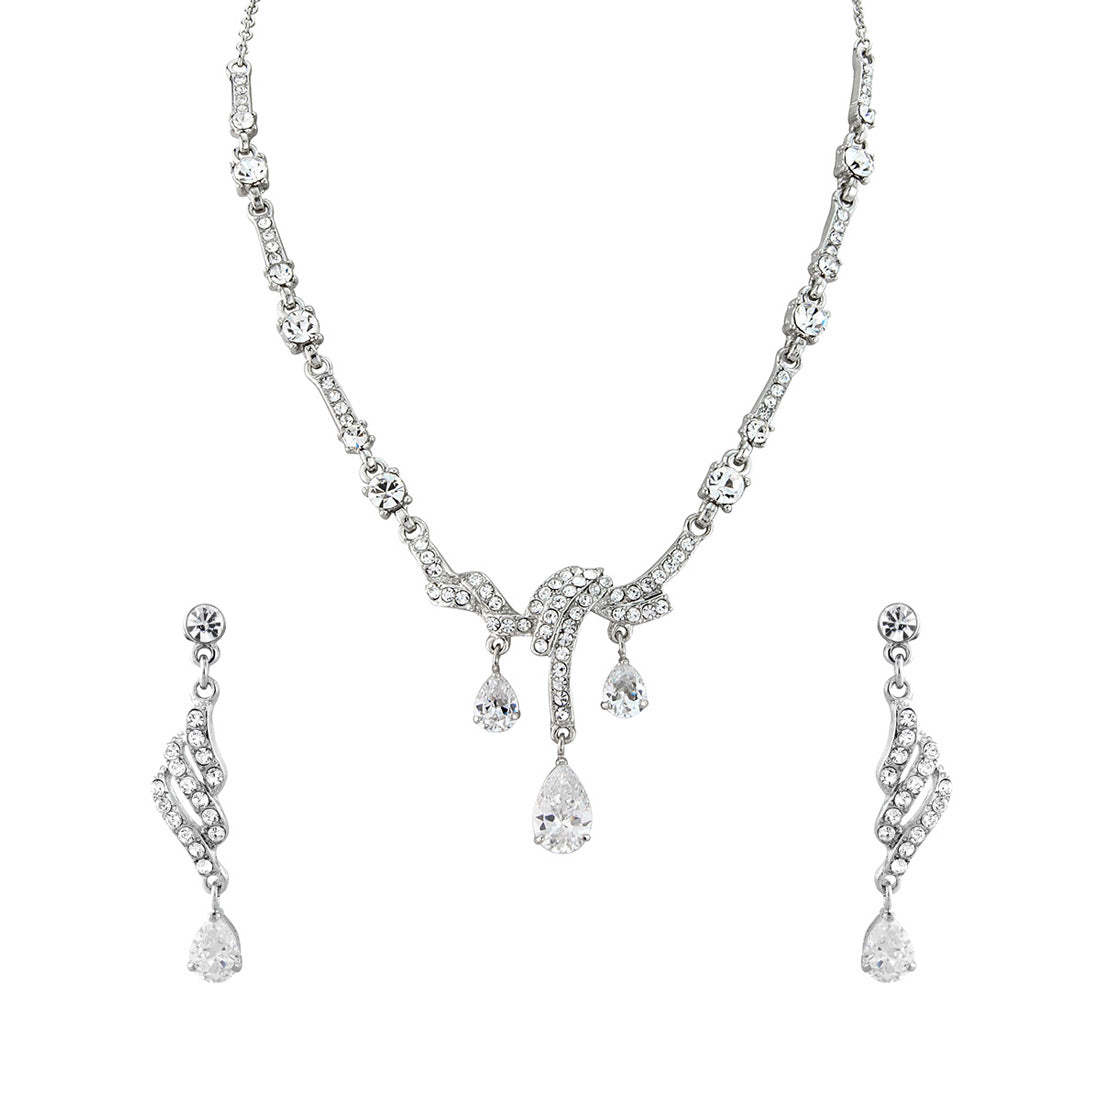 Timeless Beauty Jewellery Set featuring crystal drop earrings and necklace